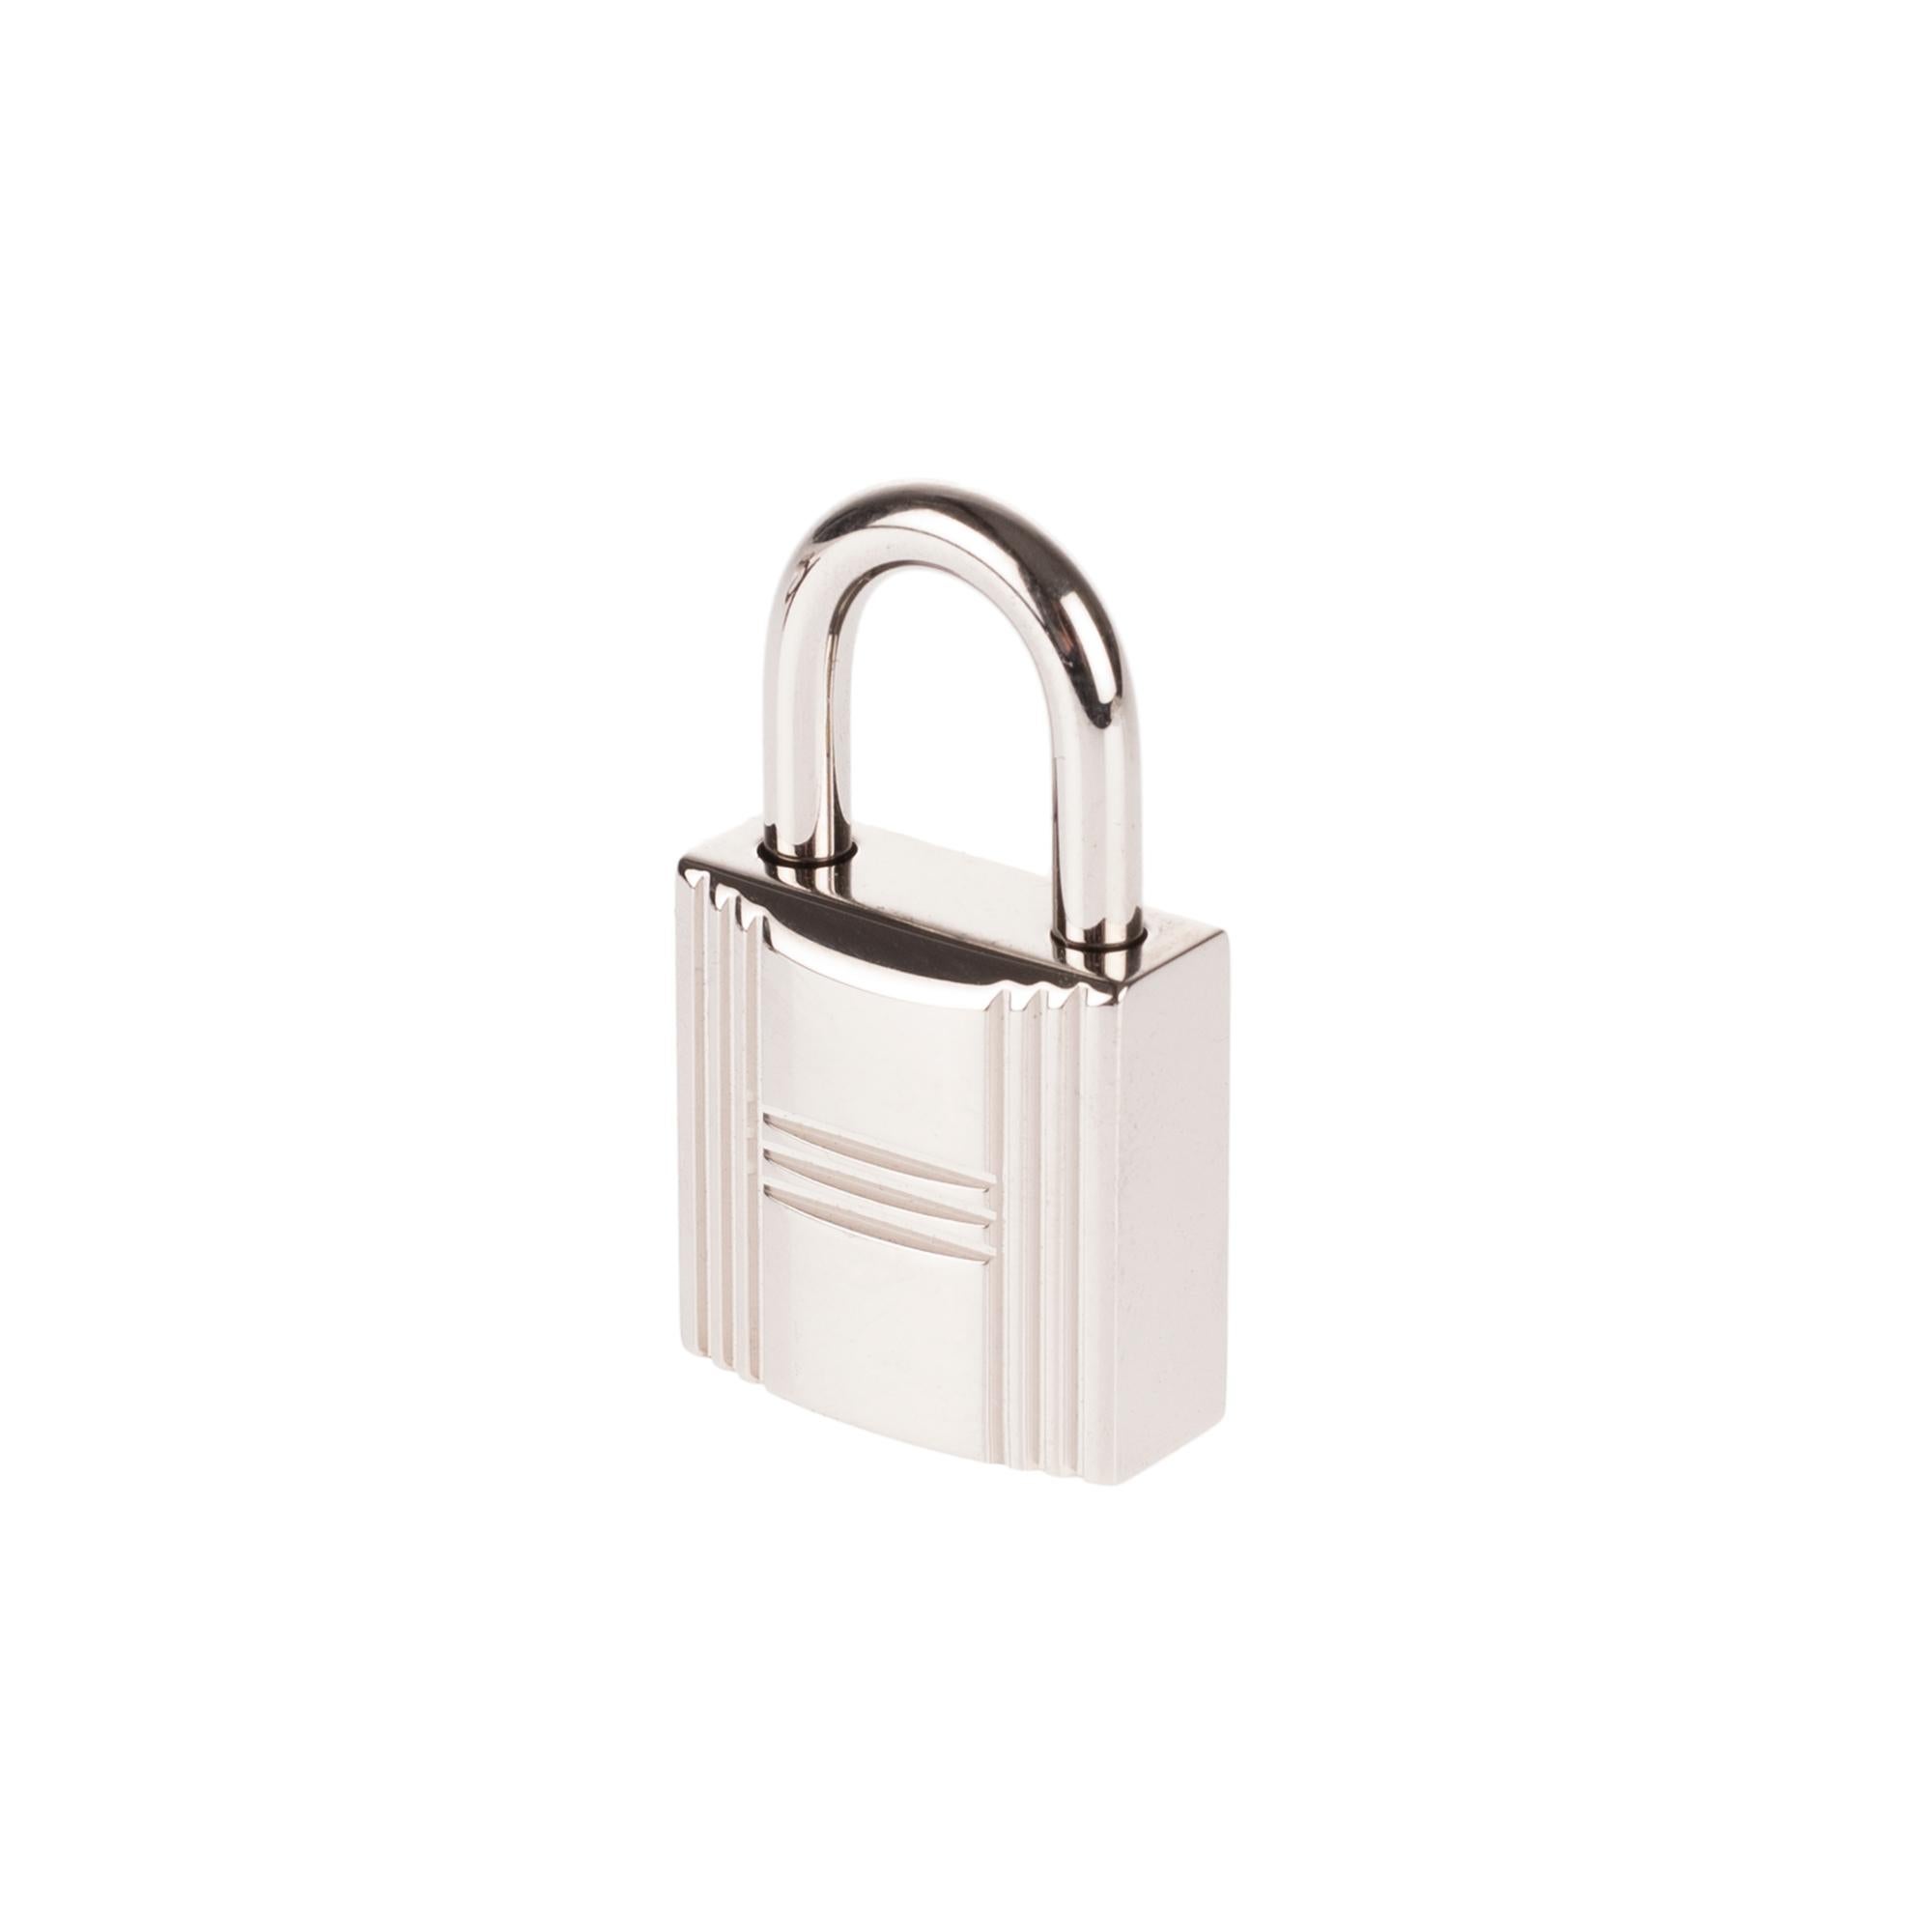 BRAND NEW Hermès Padlock in Palladium Silver for Birkin and Kelly.
Sold with its 2 keys (number 161) and dustbag.
Signature: Hermès.
Dimensions: 2 * 2 * 3,5 cm.
